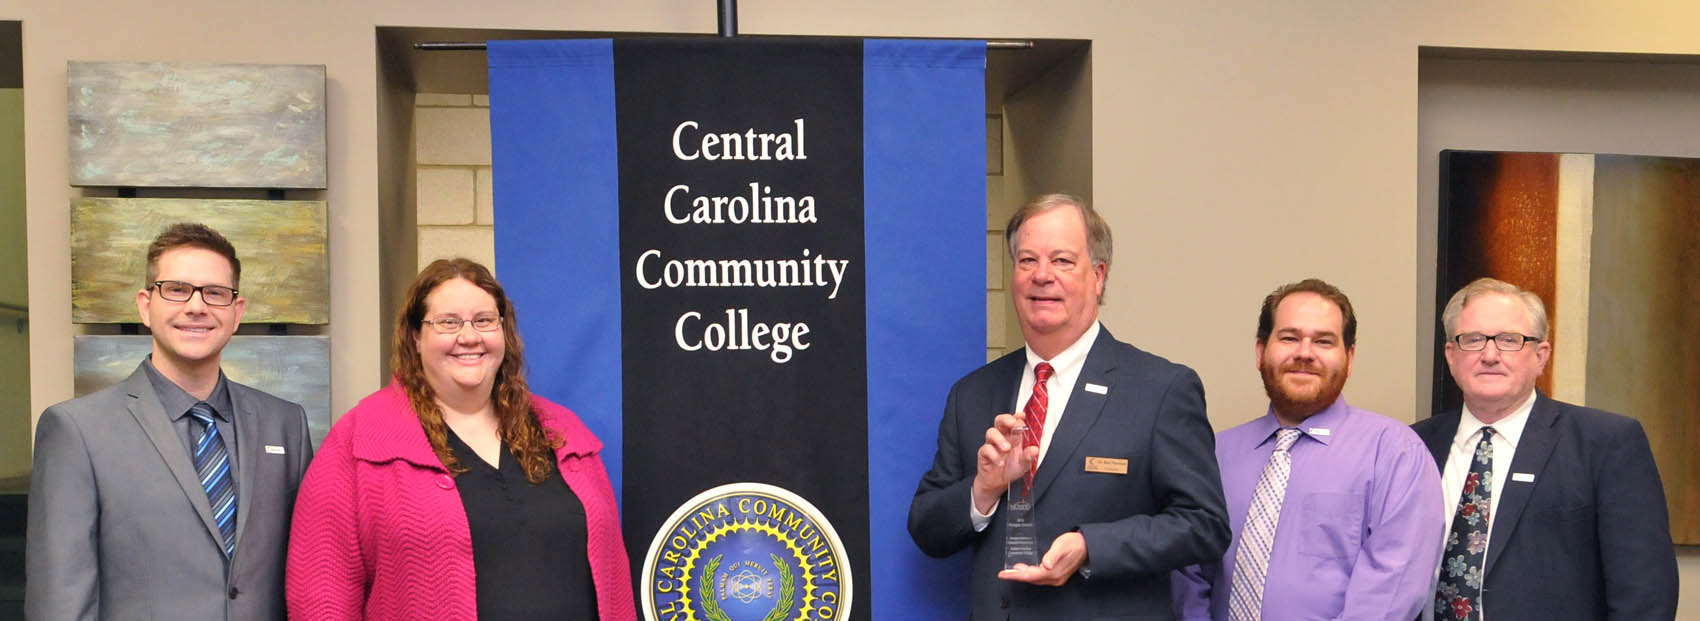 Click to enlarge,  Central Carolina Community College has won a first-place national Paragon Award from the National Council for Marketing &amp; Public Relations (NCMPR) in the category of Government Relations or Community Relations Project. CCCC President Dr. T. Eston Marchant (middle) holds the Paragon Award. Joining Dr. Marchant in the photo are members of the CCCC Marketing and Public Affairs staff, left to right: Neil McGowan, Graphic Artist &amp; Multimedia Specialist; Marcie Dishman, Associate Vice President of Marketing and Human Resources; Dr. Marchant; Morgan Steele, Director of Web and Creative Strategy; and R.V. Hight, Director of Communications. 